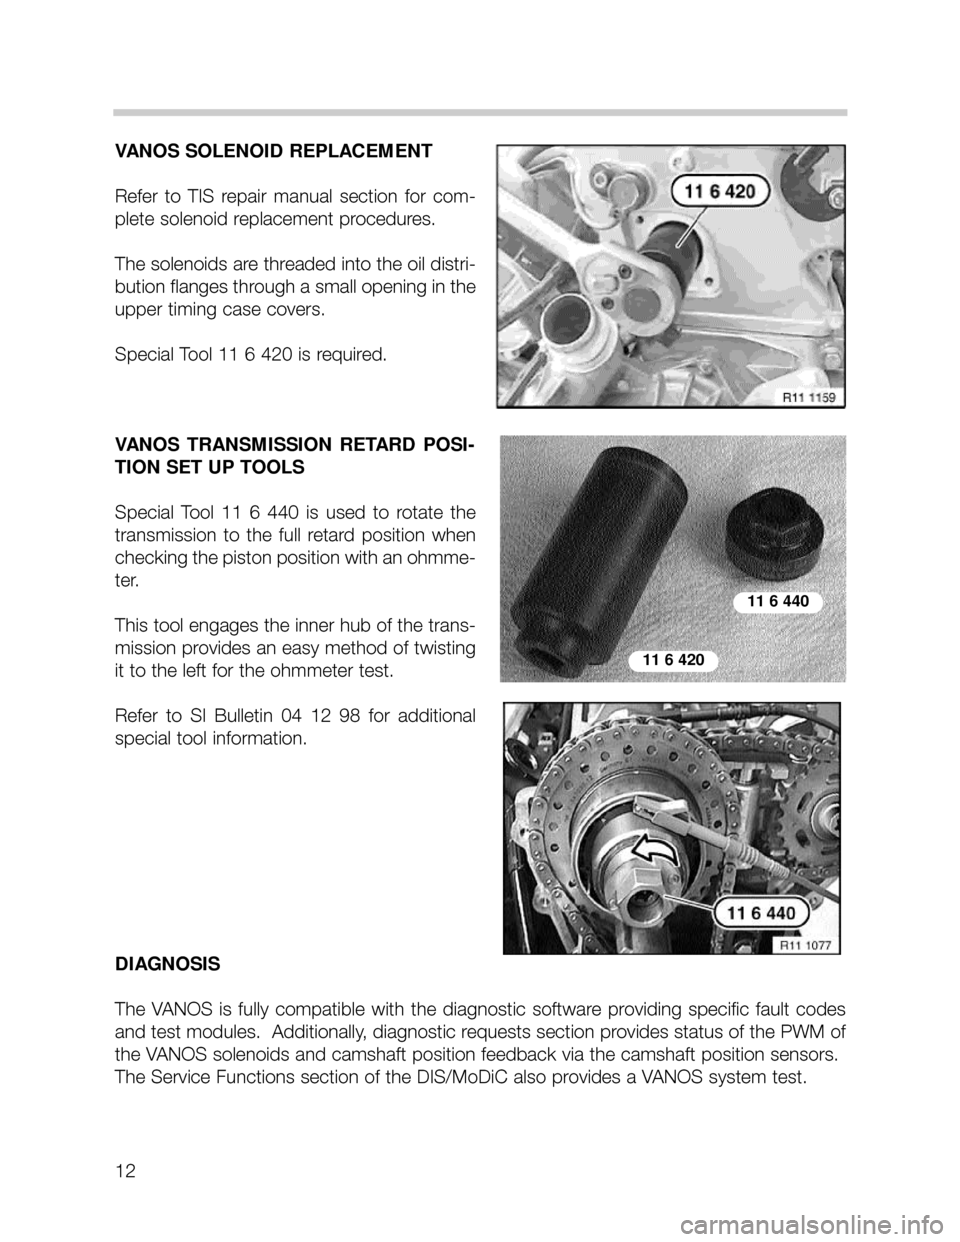 BMW X5 2006 E53 M62TU Engine Workshop Manual 12
VANOS SOLENOID REPLACEMENT
Refer  to  TIS  repair  manual  section  for  com-
plete solenoid replacement procedures.  
The solenoids are threaded into the oil distri-
bution flanges through a small